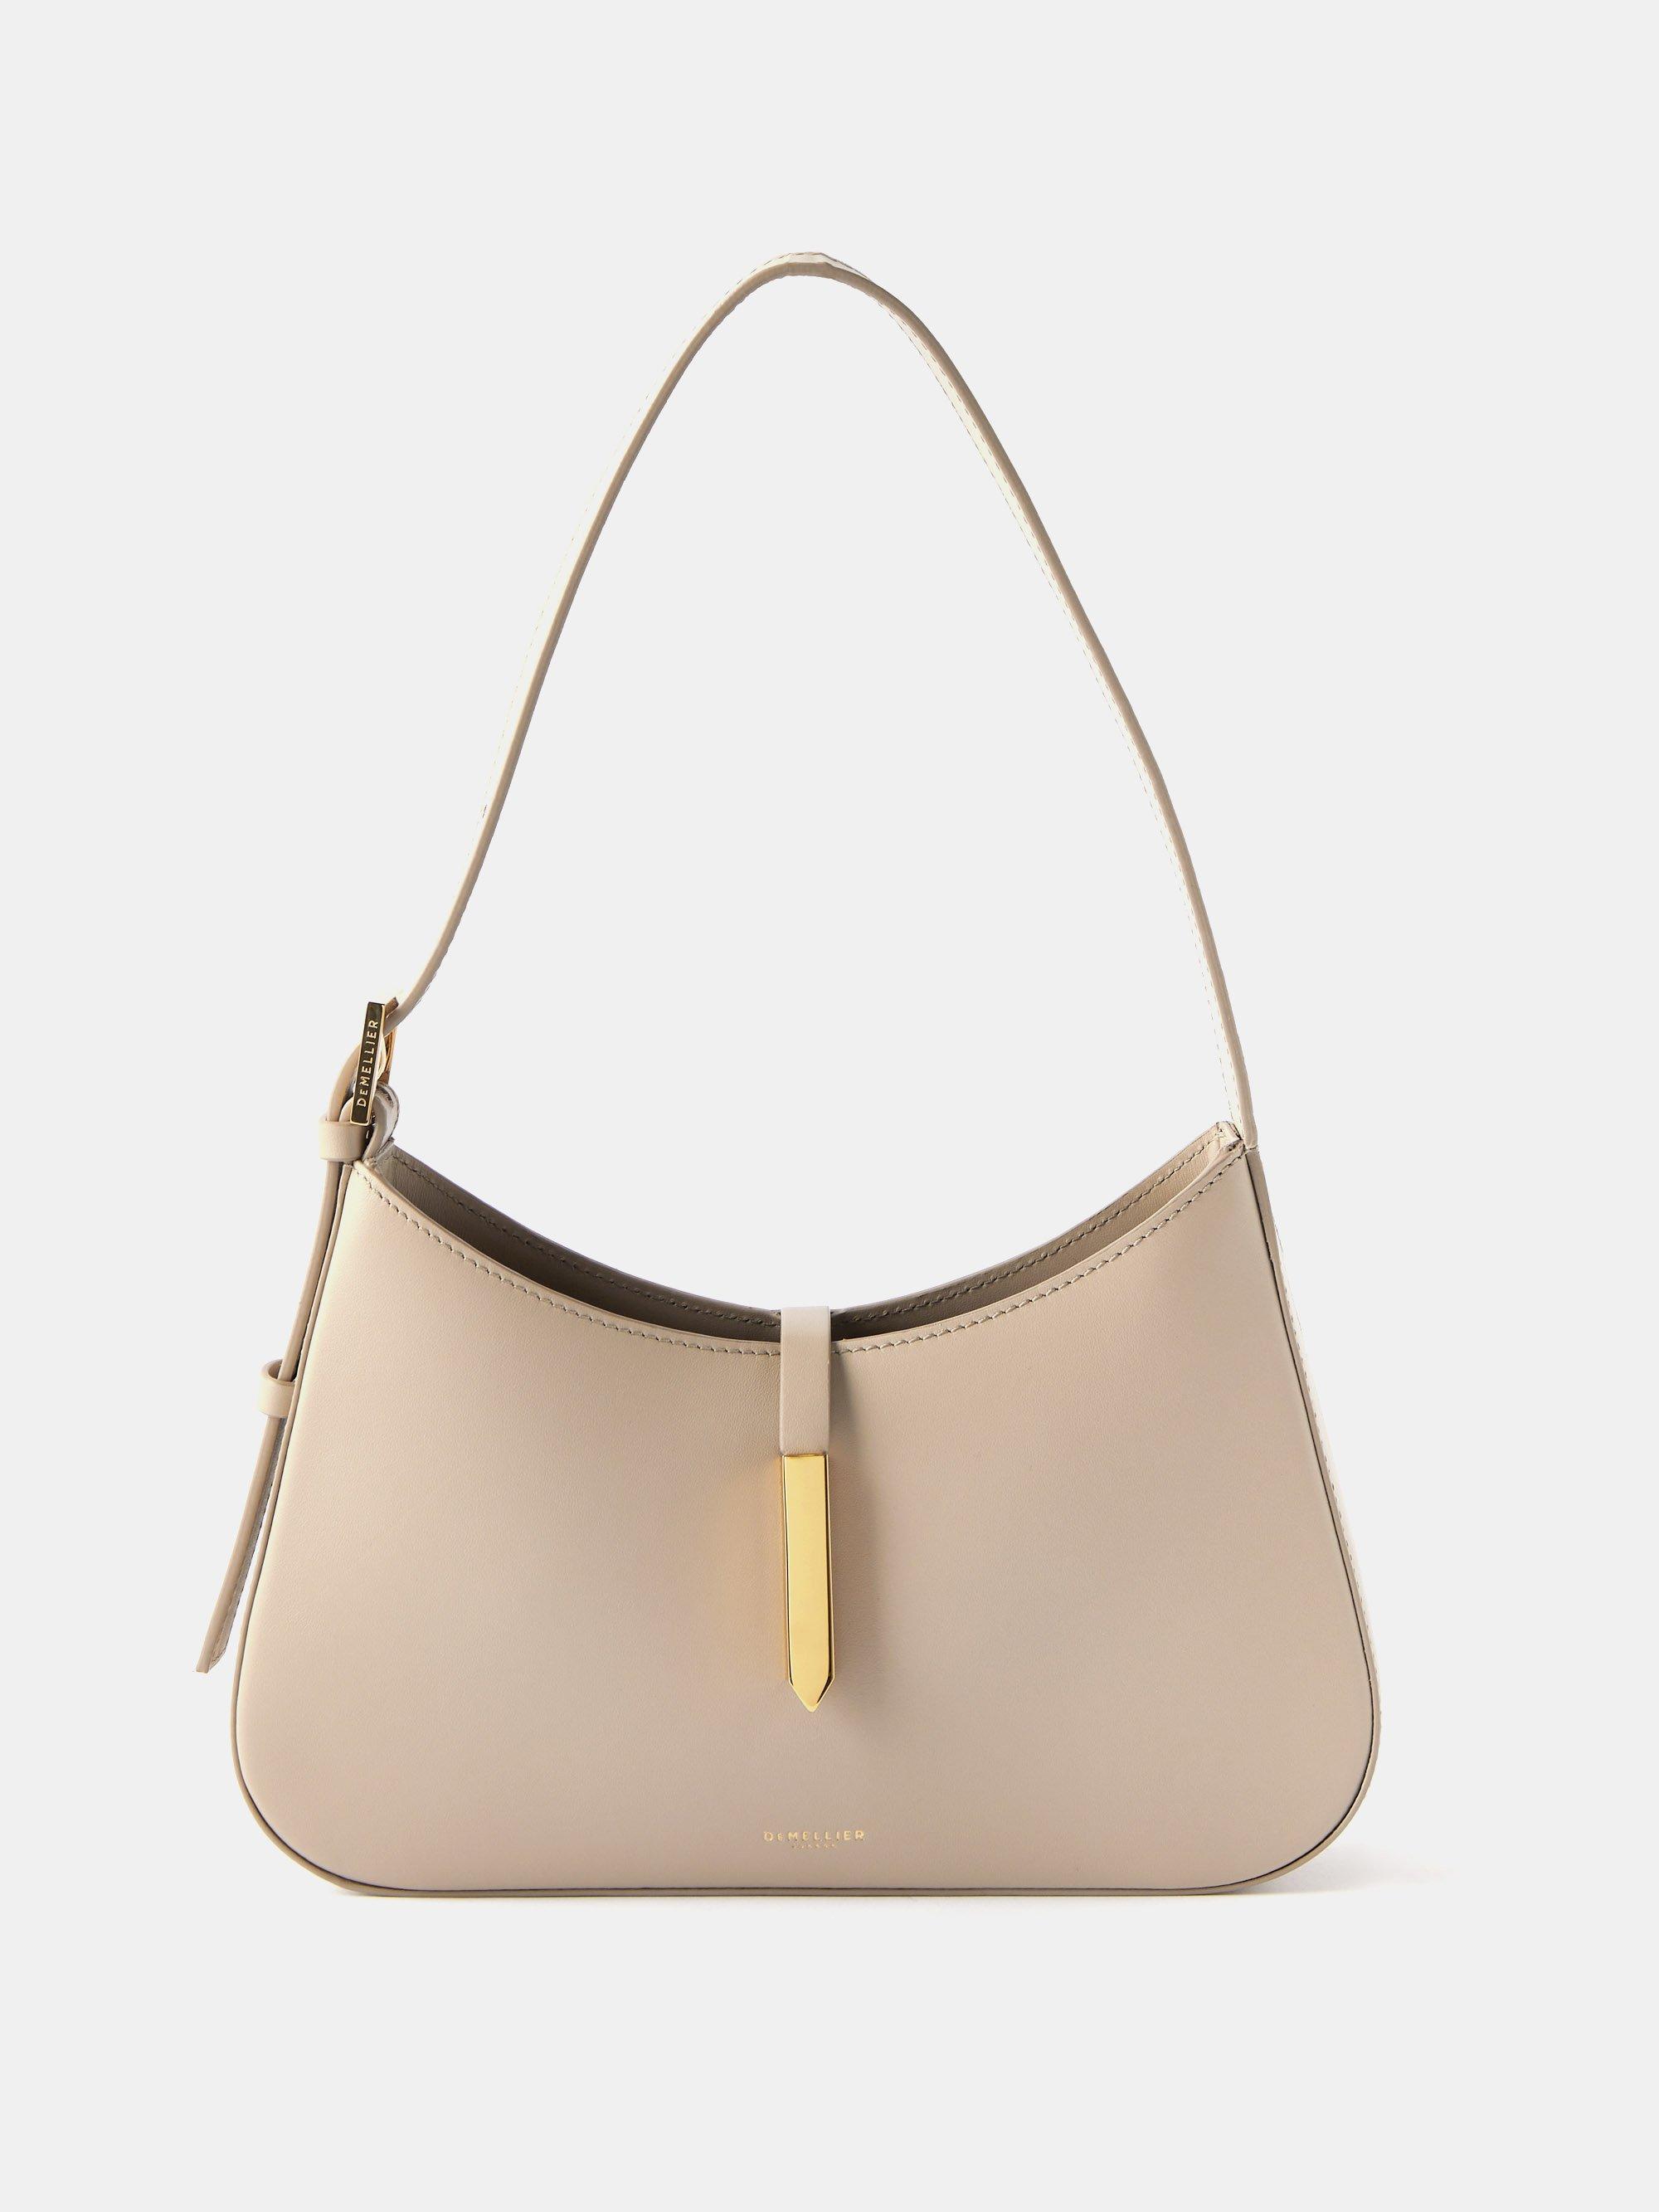 DeMellier Tokyo Small Leather Shoulder Bag in Natural | Lyst